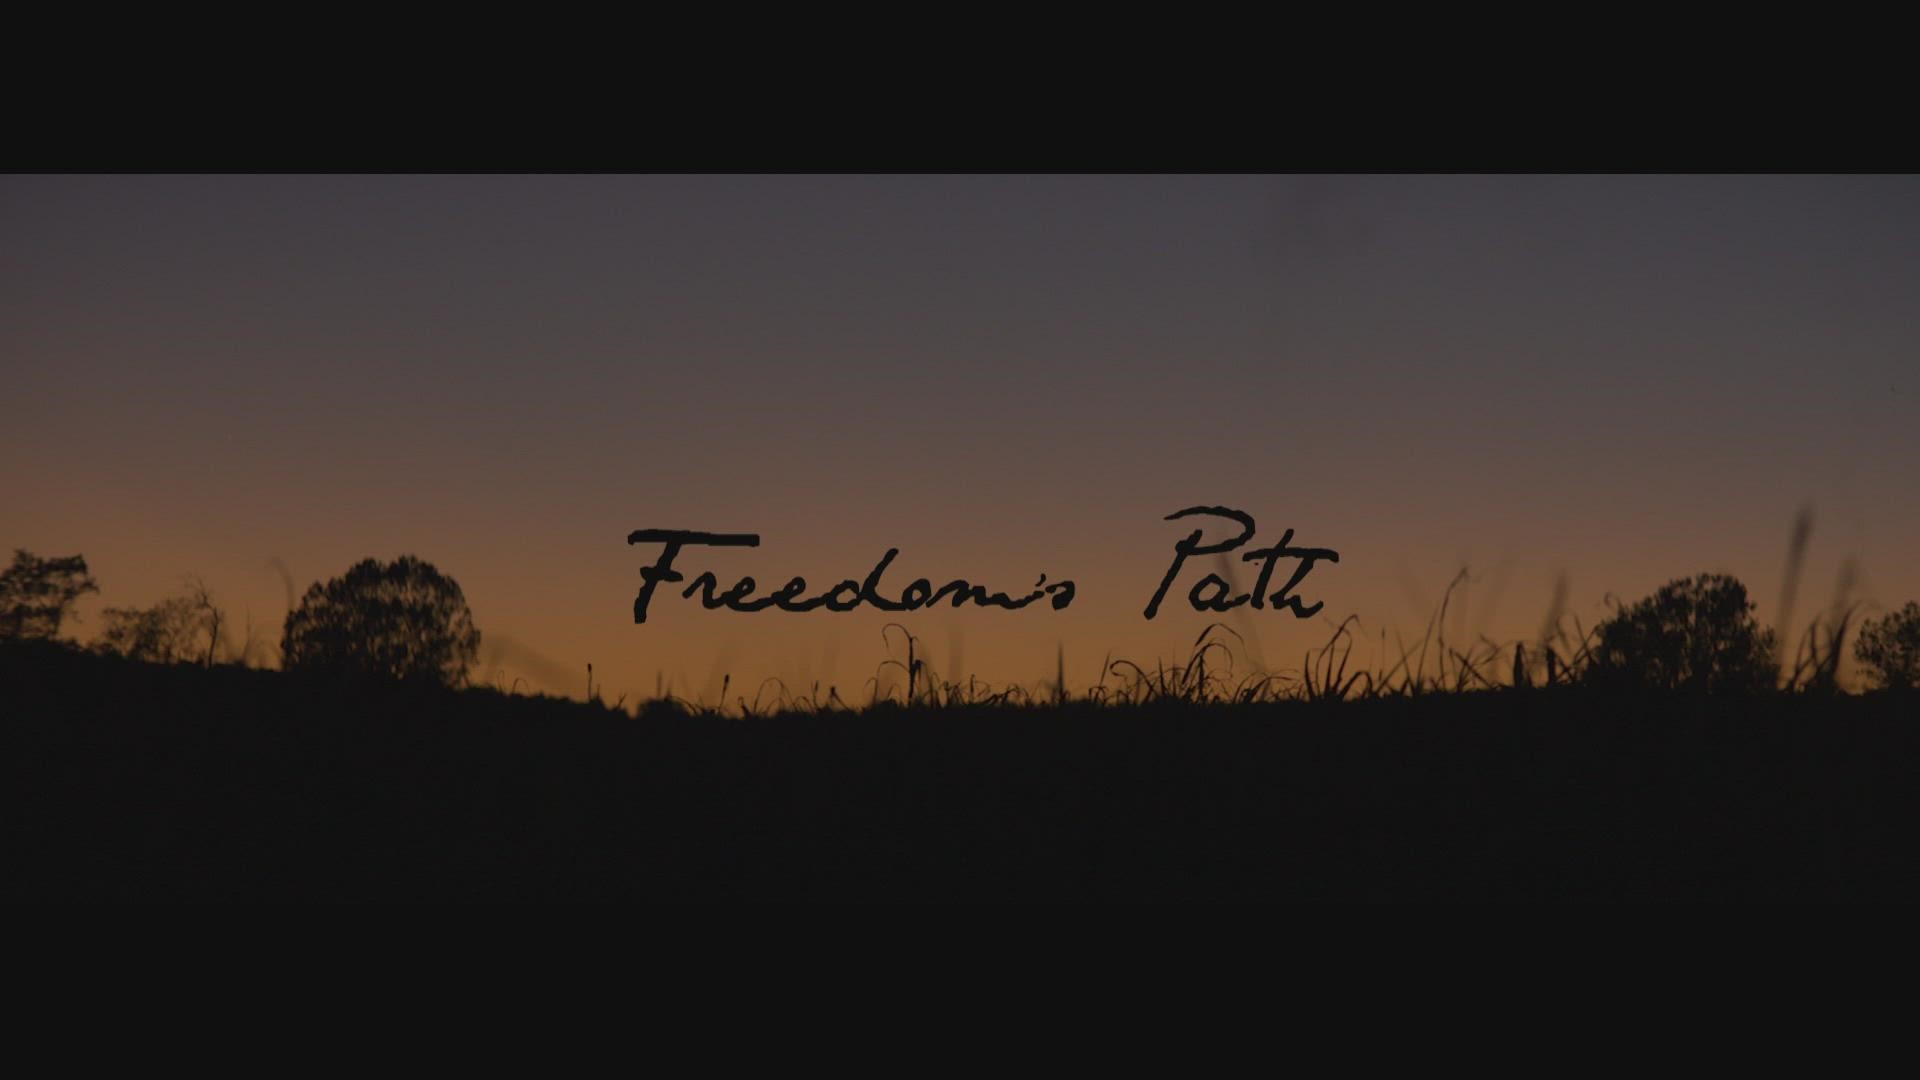 The first ever Vashon Island Film Festival is happening this weekend. Director Brett Smith will debut "Freedom's Path" at the festival.